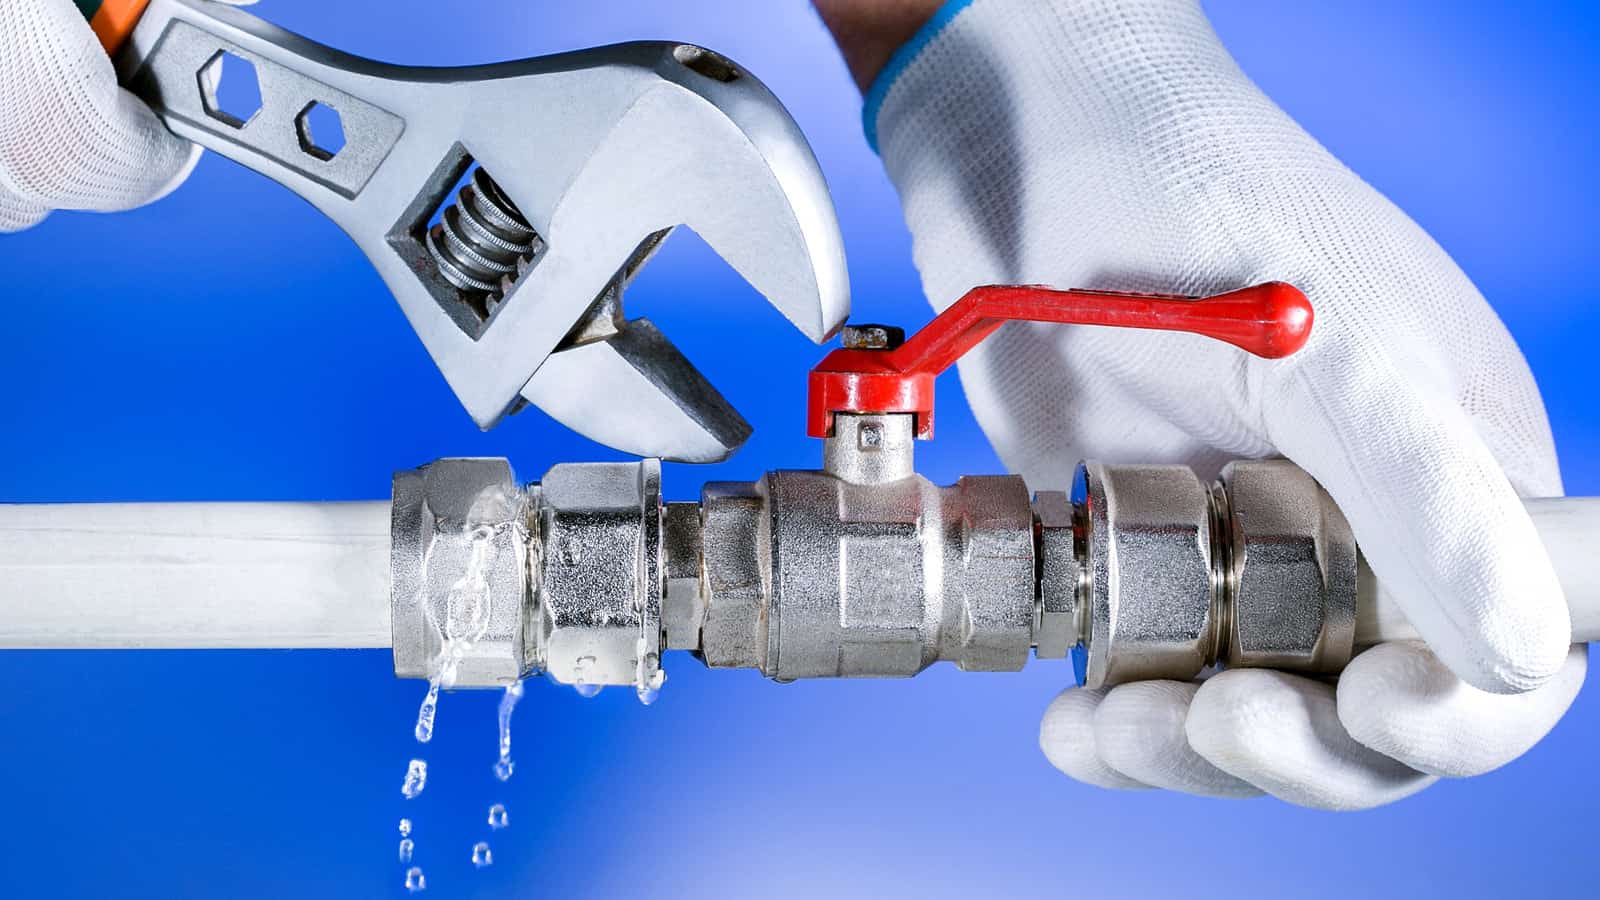 Central Texas Plumbing Solutions of Waco